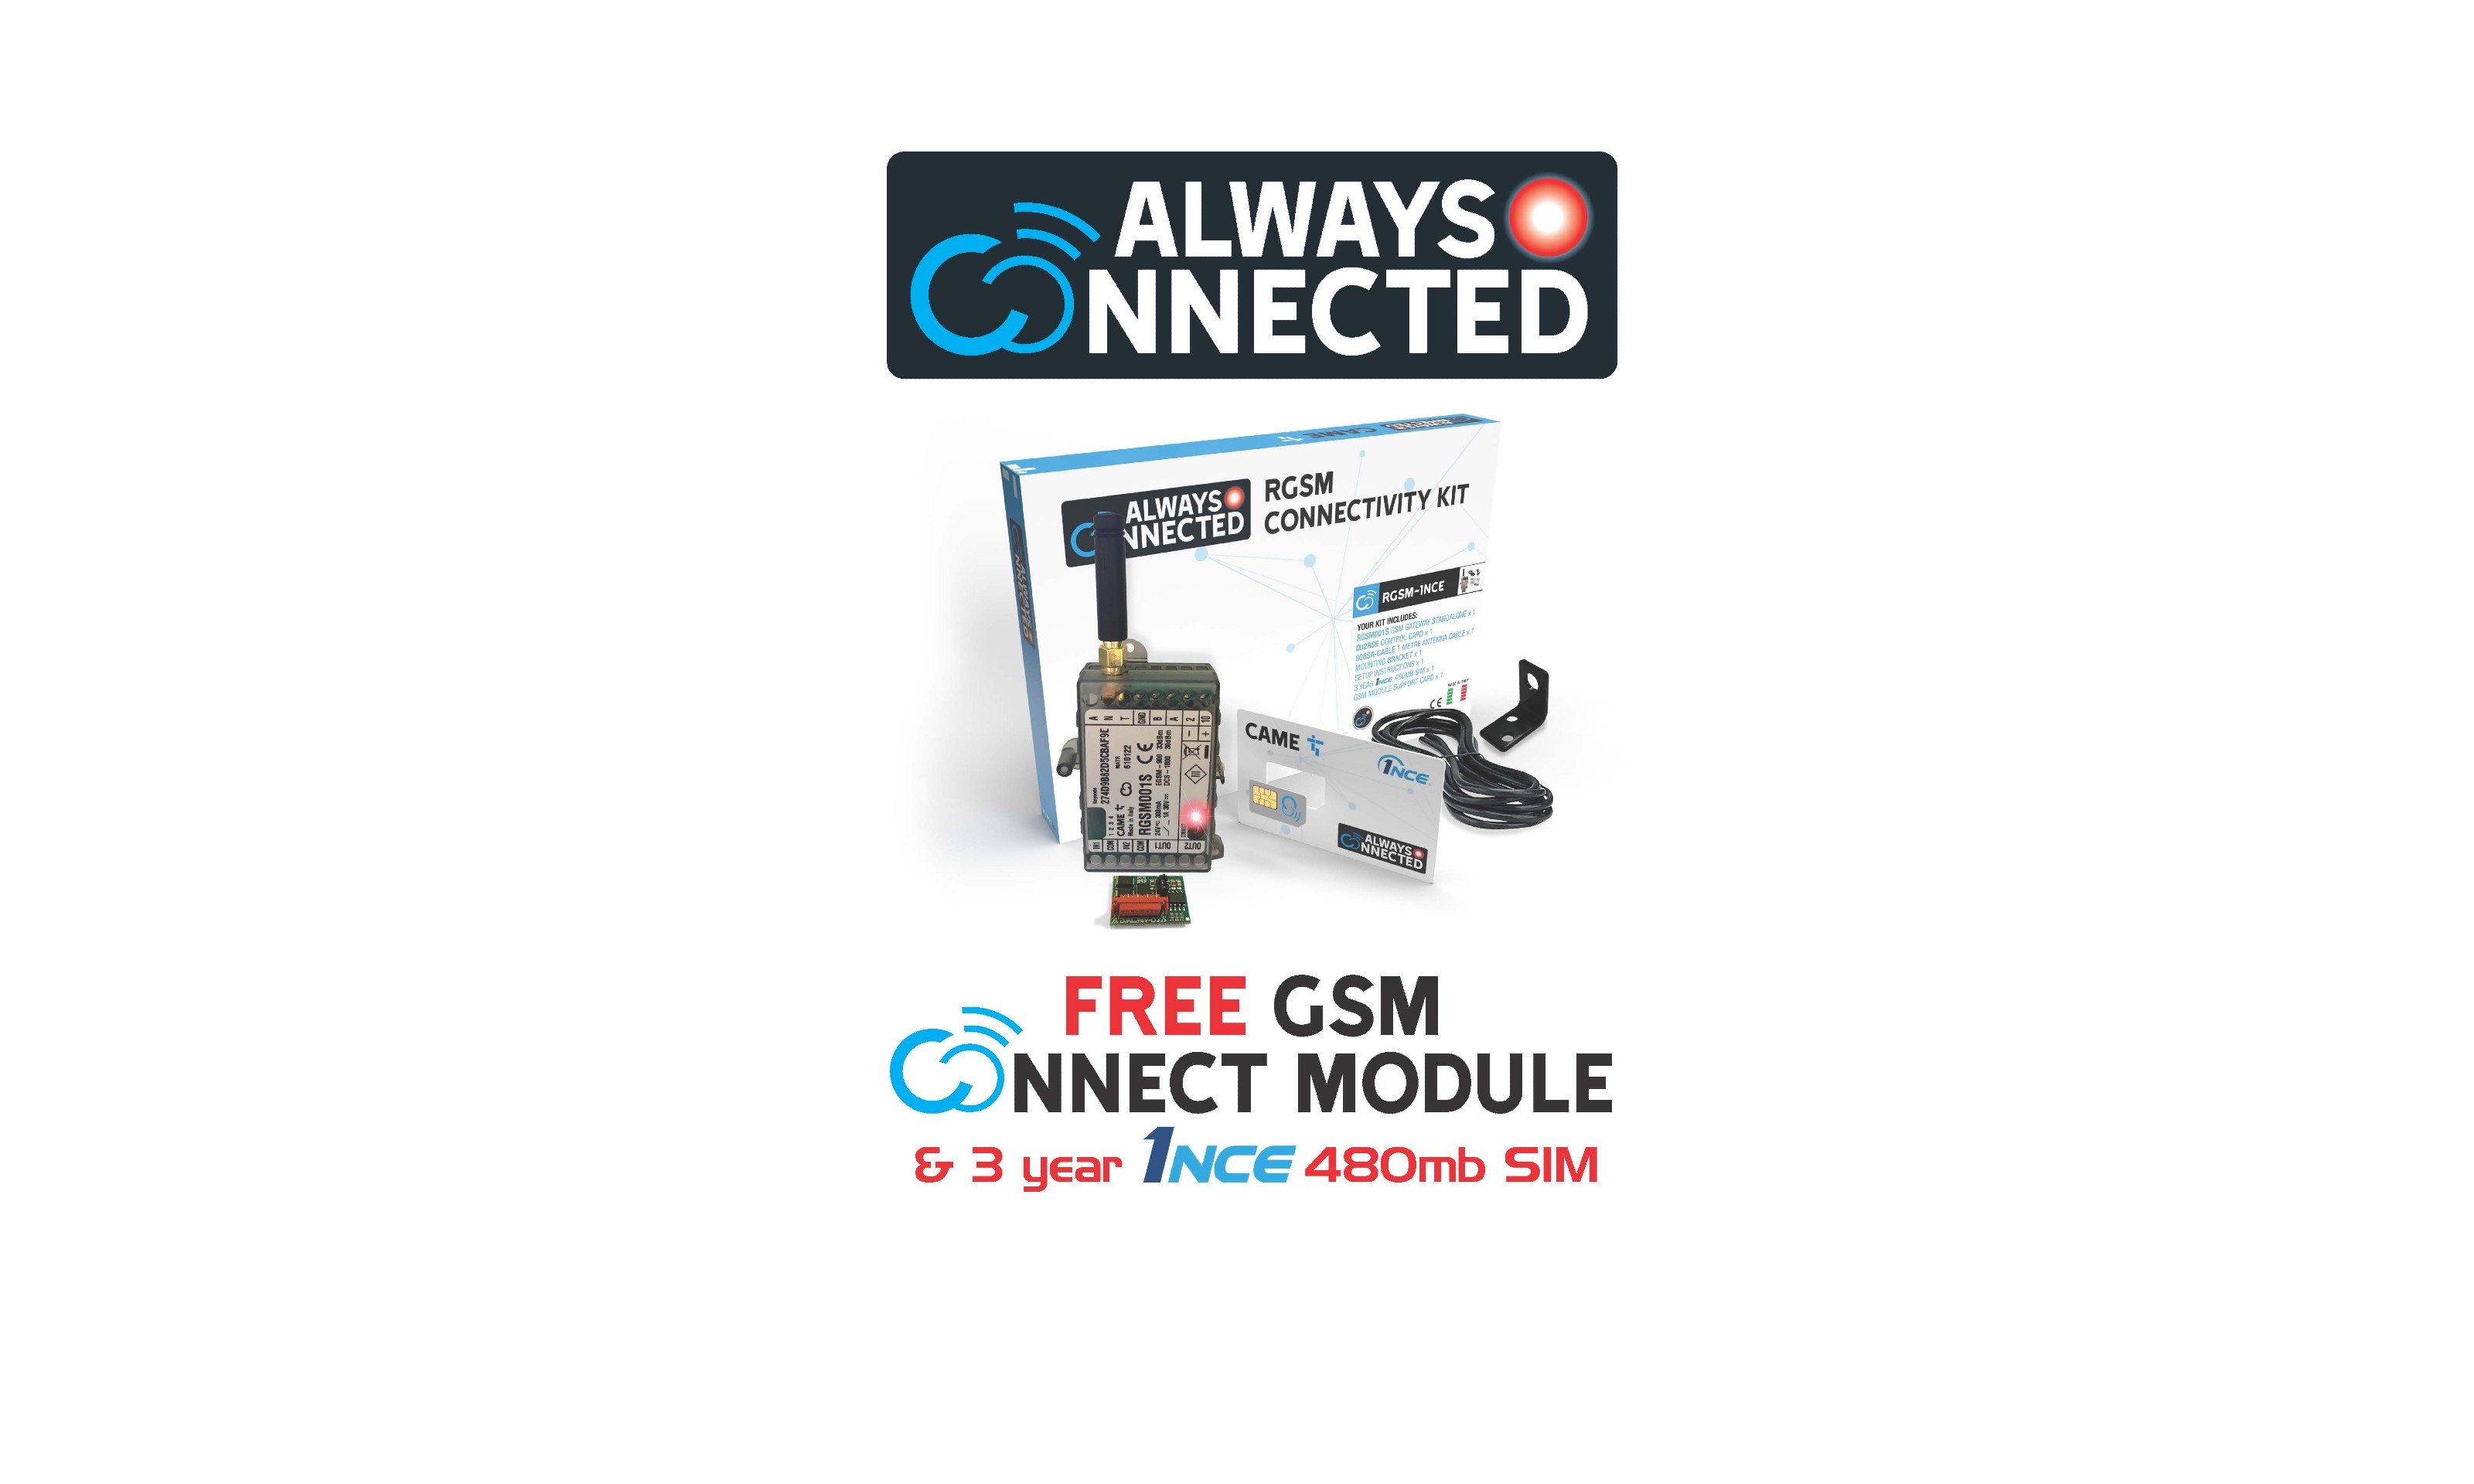 Always Connected: Free connectivity solution through an unrivalled cloud system 